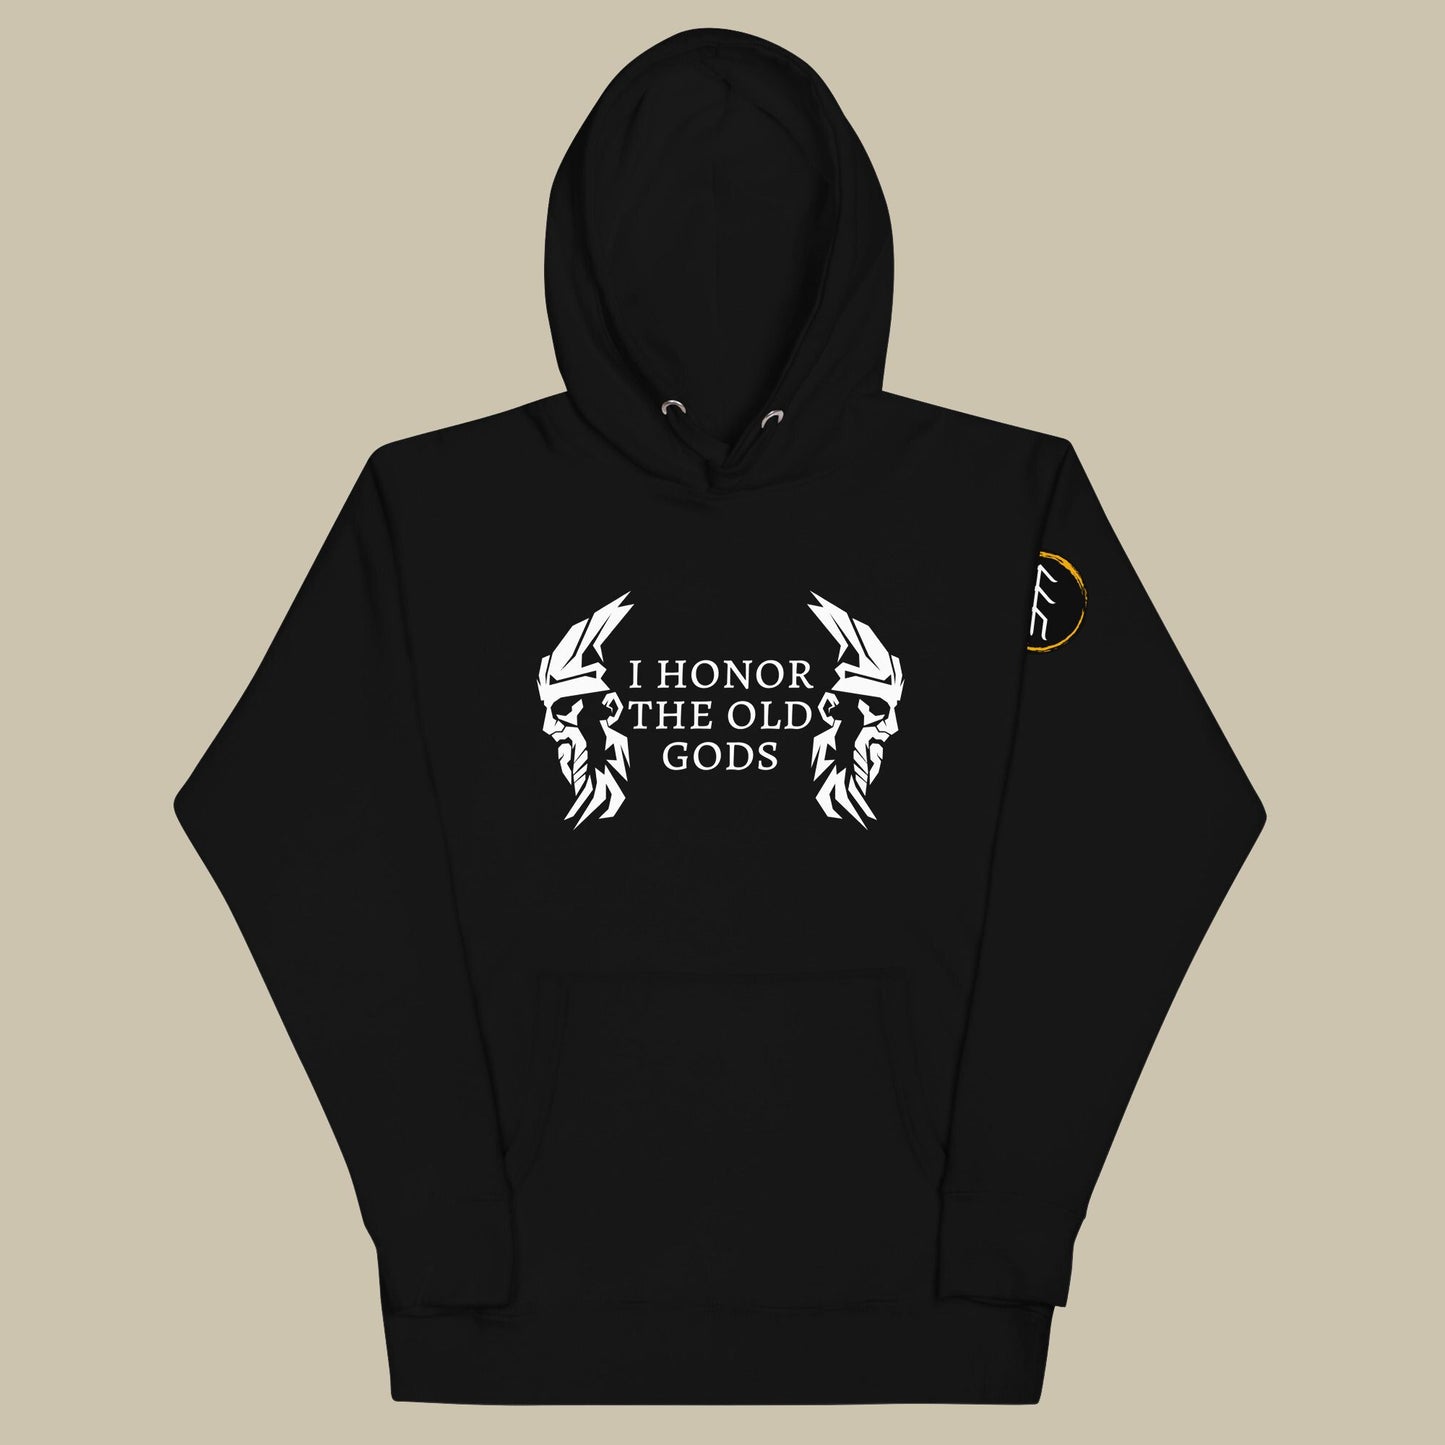 "I honor the Old Gods" Hoodie